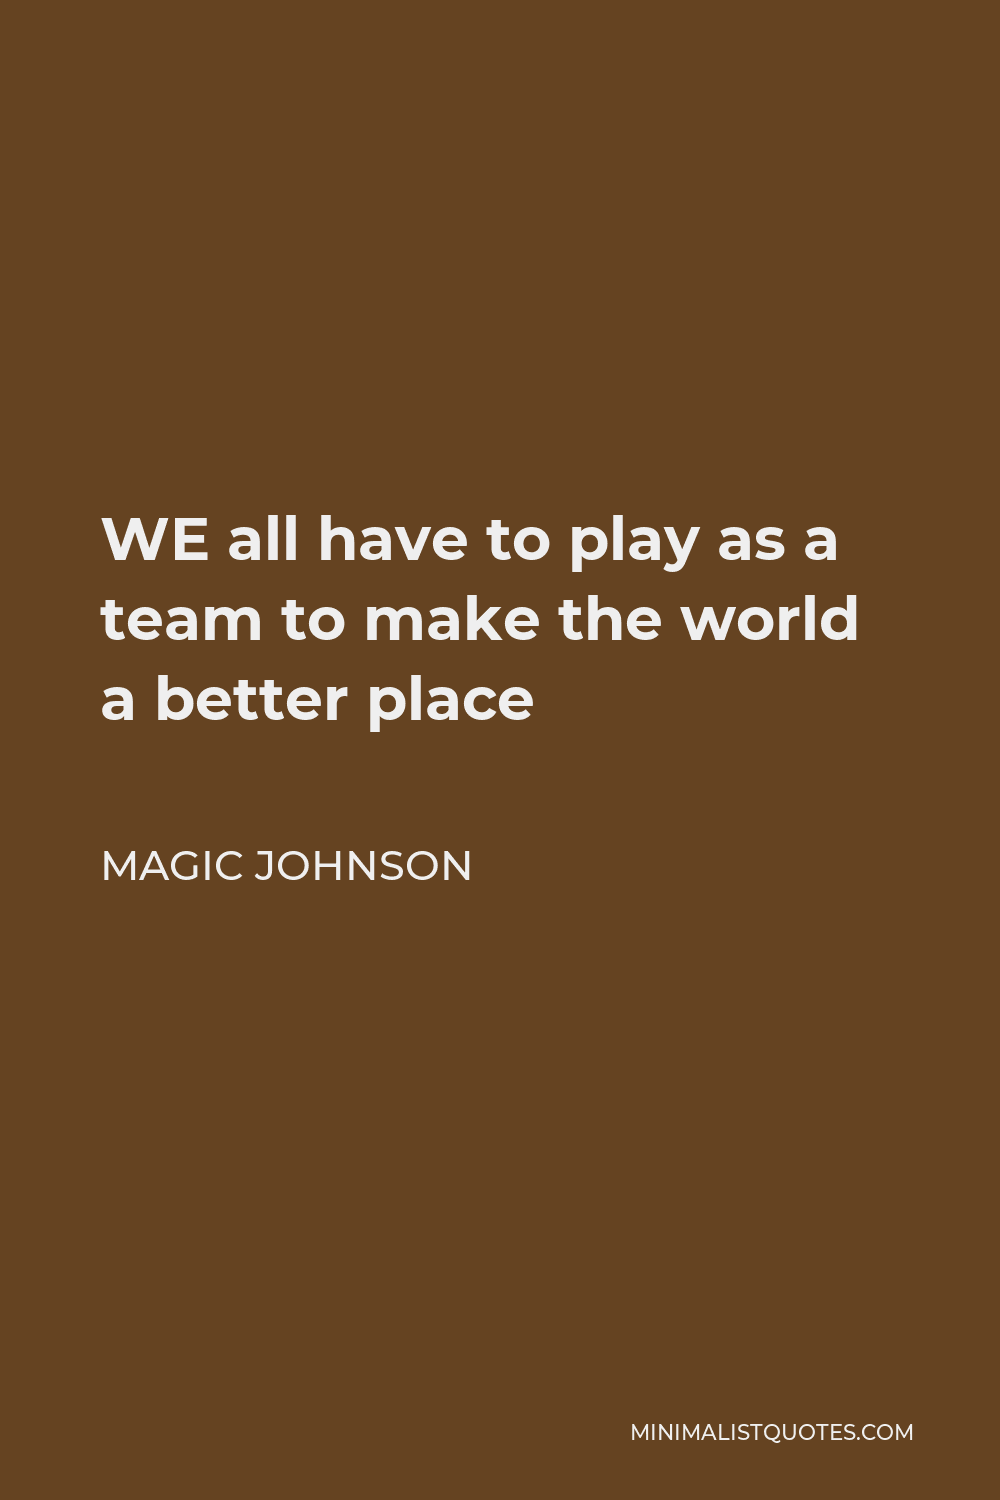 Magic Johnson Quote - WE all have to play as a team to make the world a better place